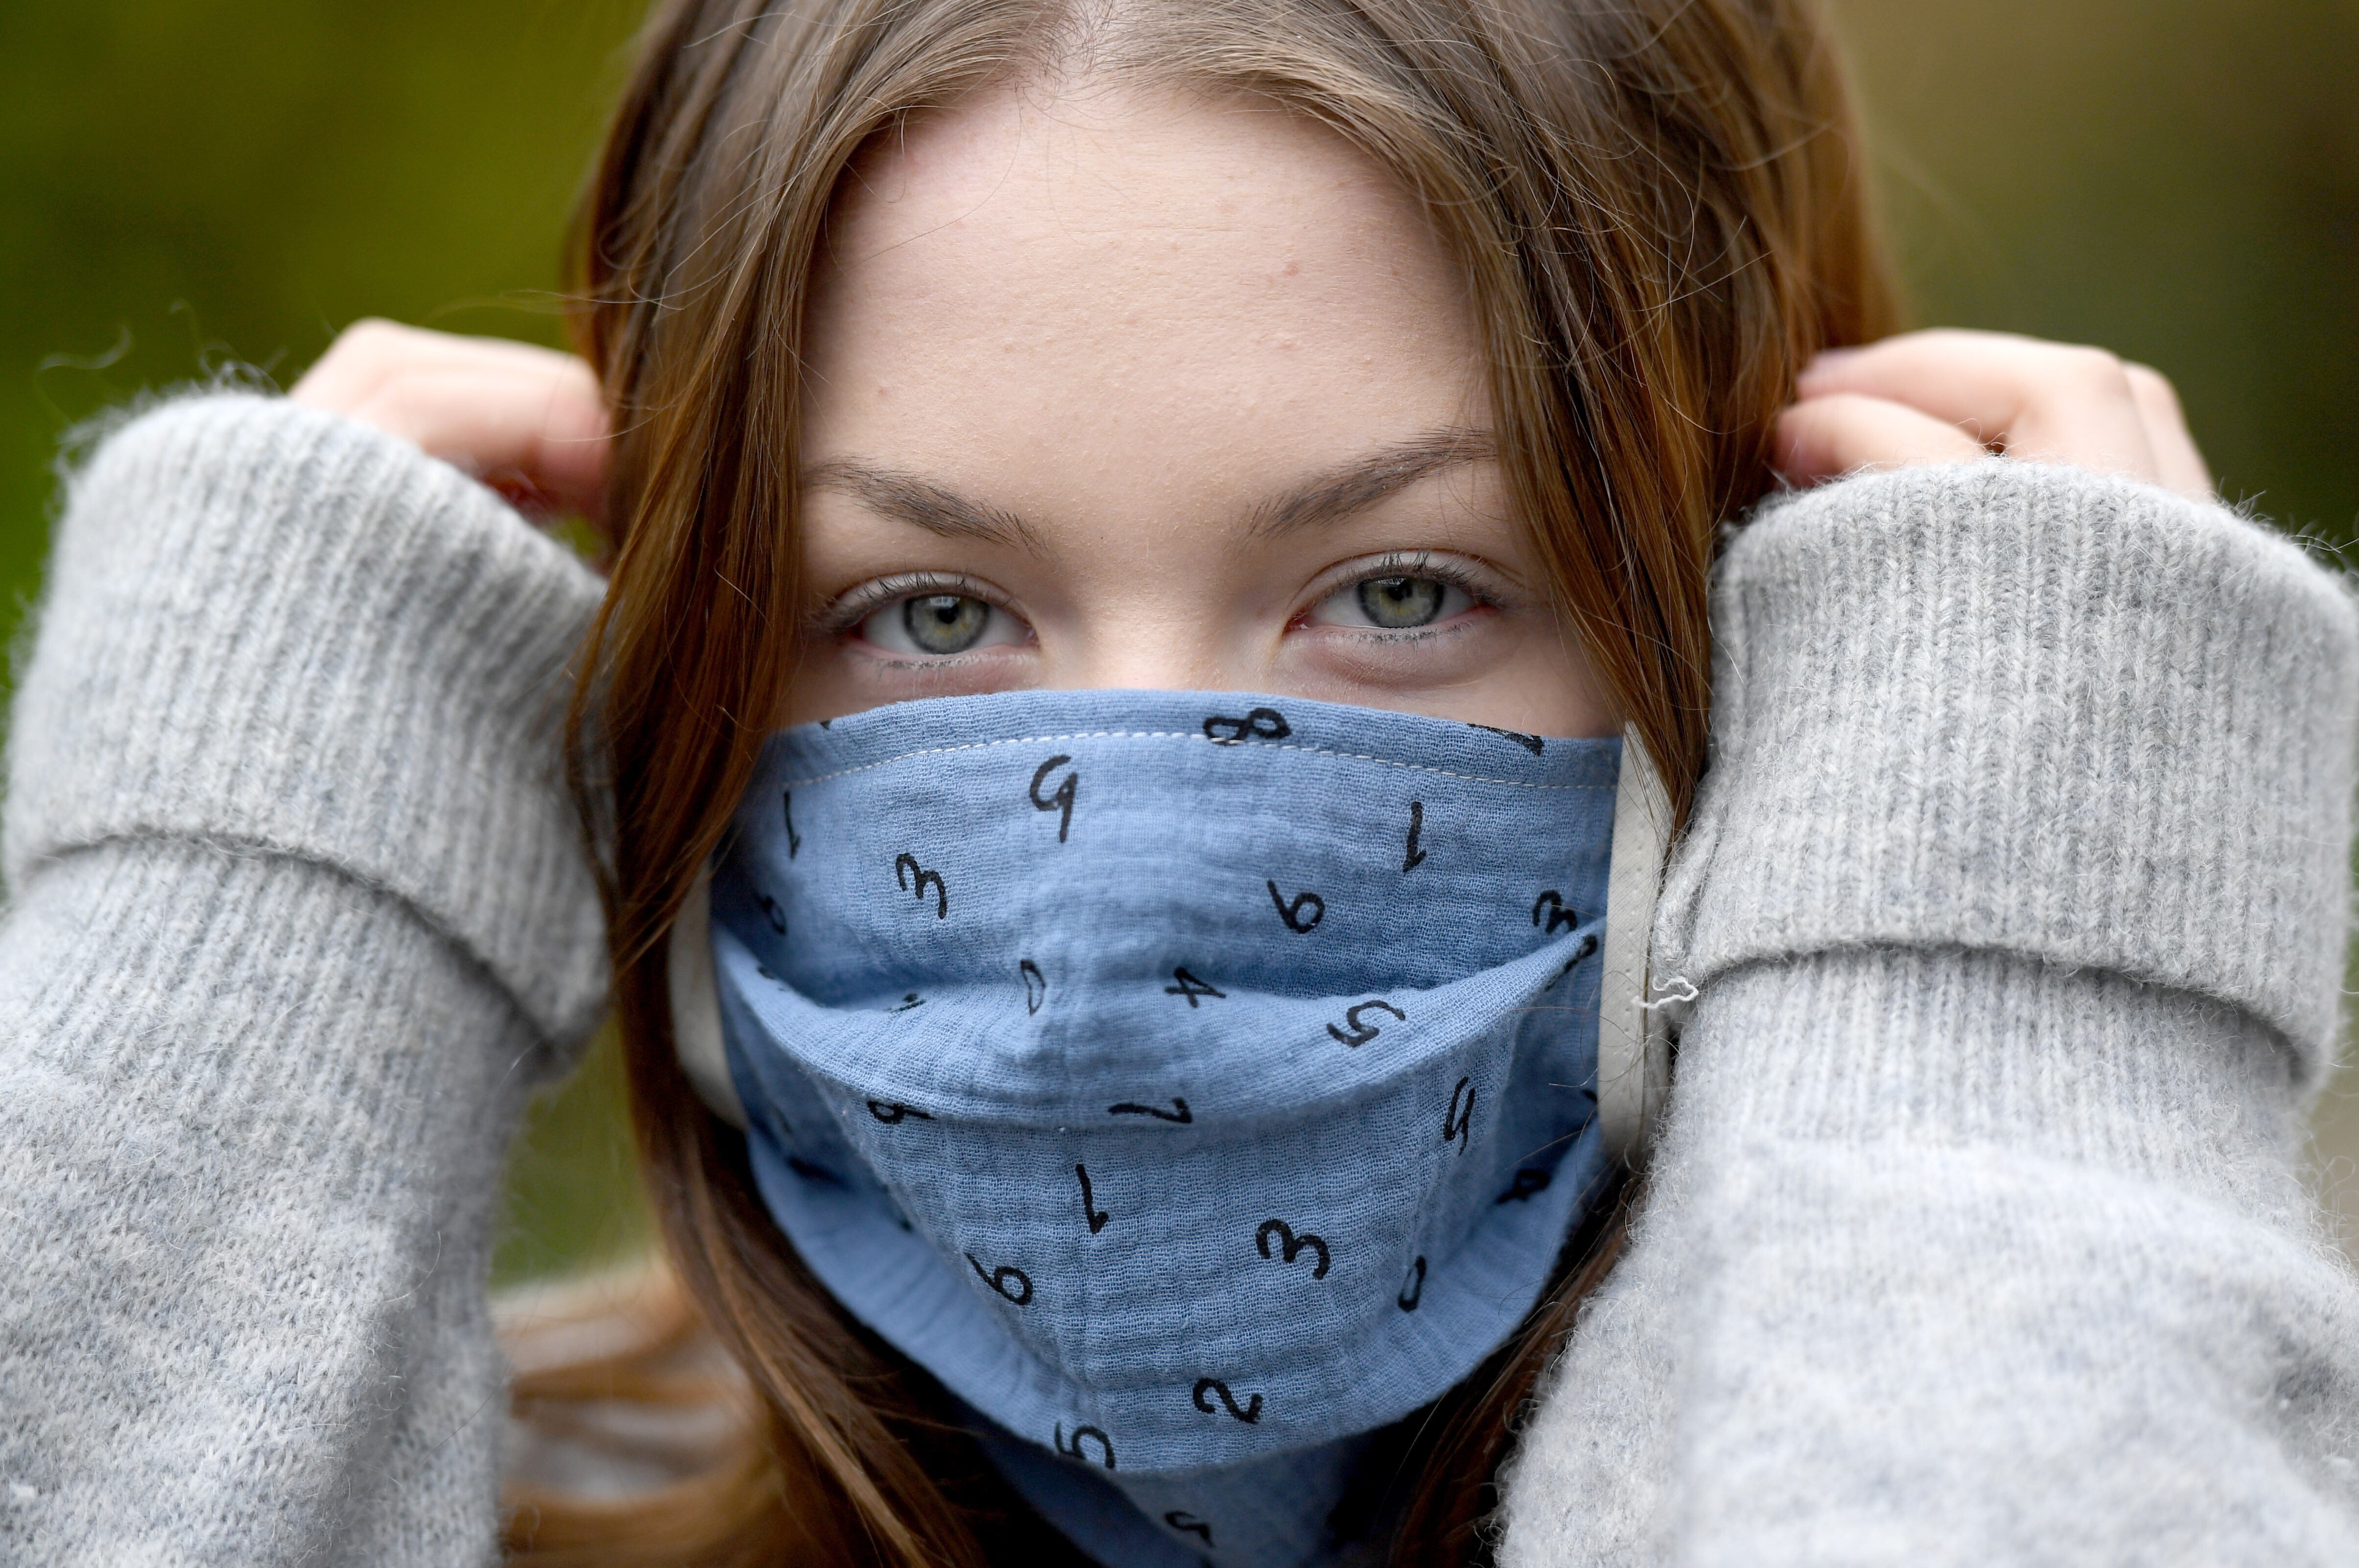 Young teens and preteens appear least likely to be infected by the coronavirus and least likely to have severe infections if they are. Photo: Carsten Rehder via Getty Images